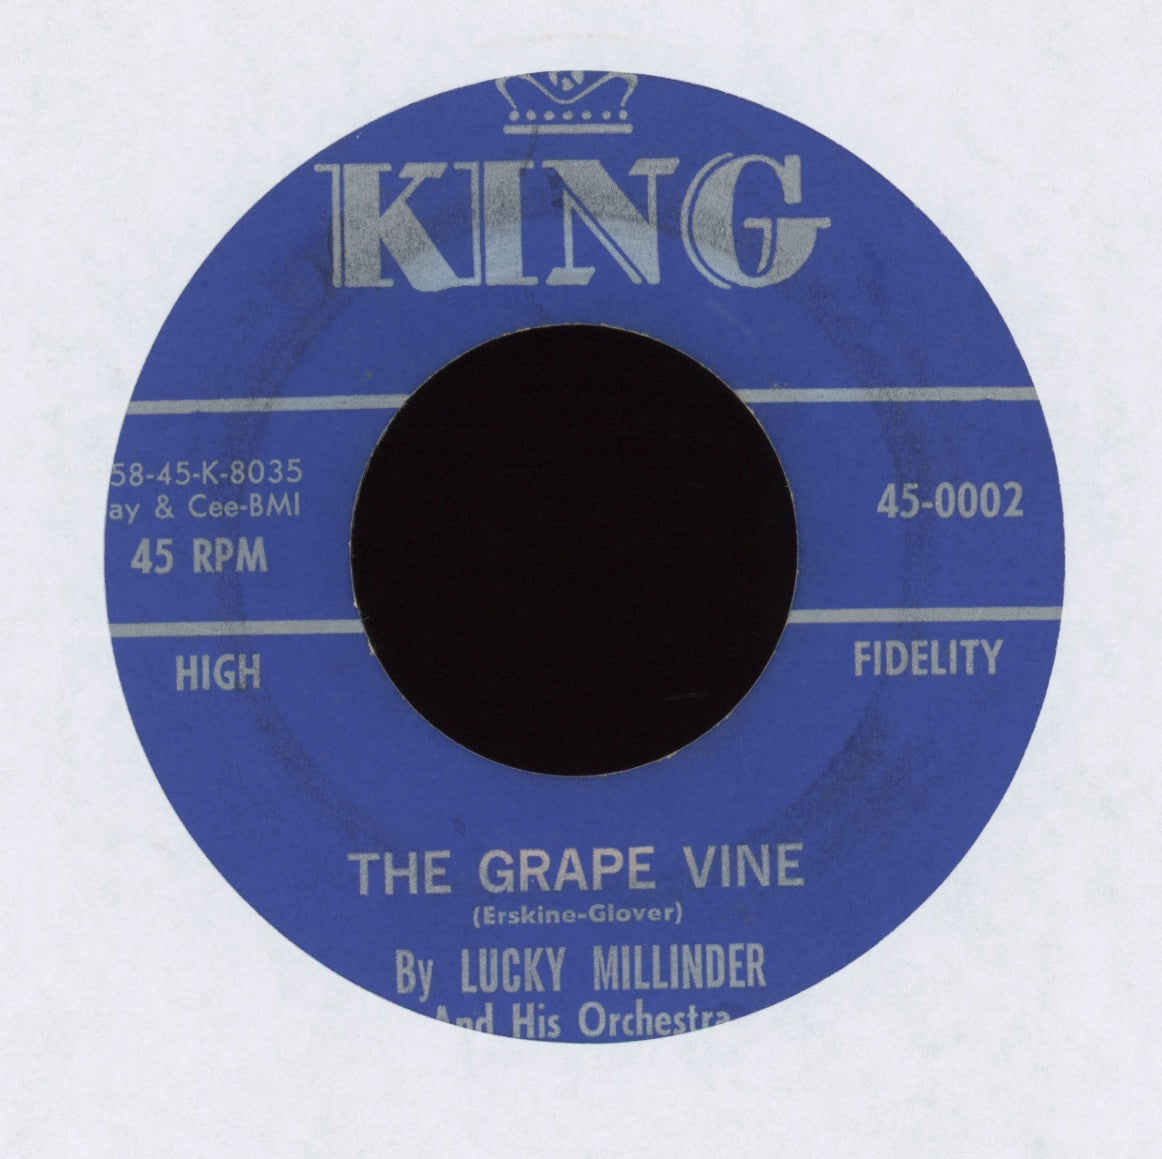 Lucky Millinder And His Orchestra - The Grape Vine on King